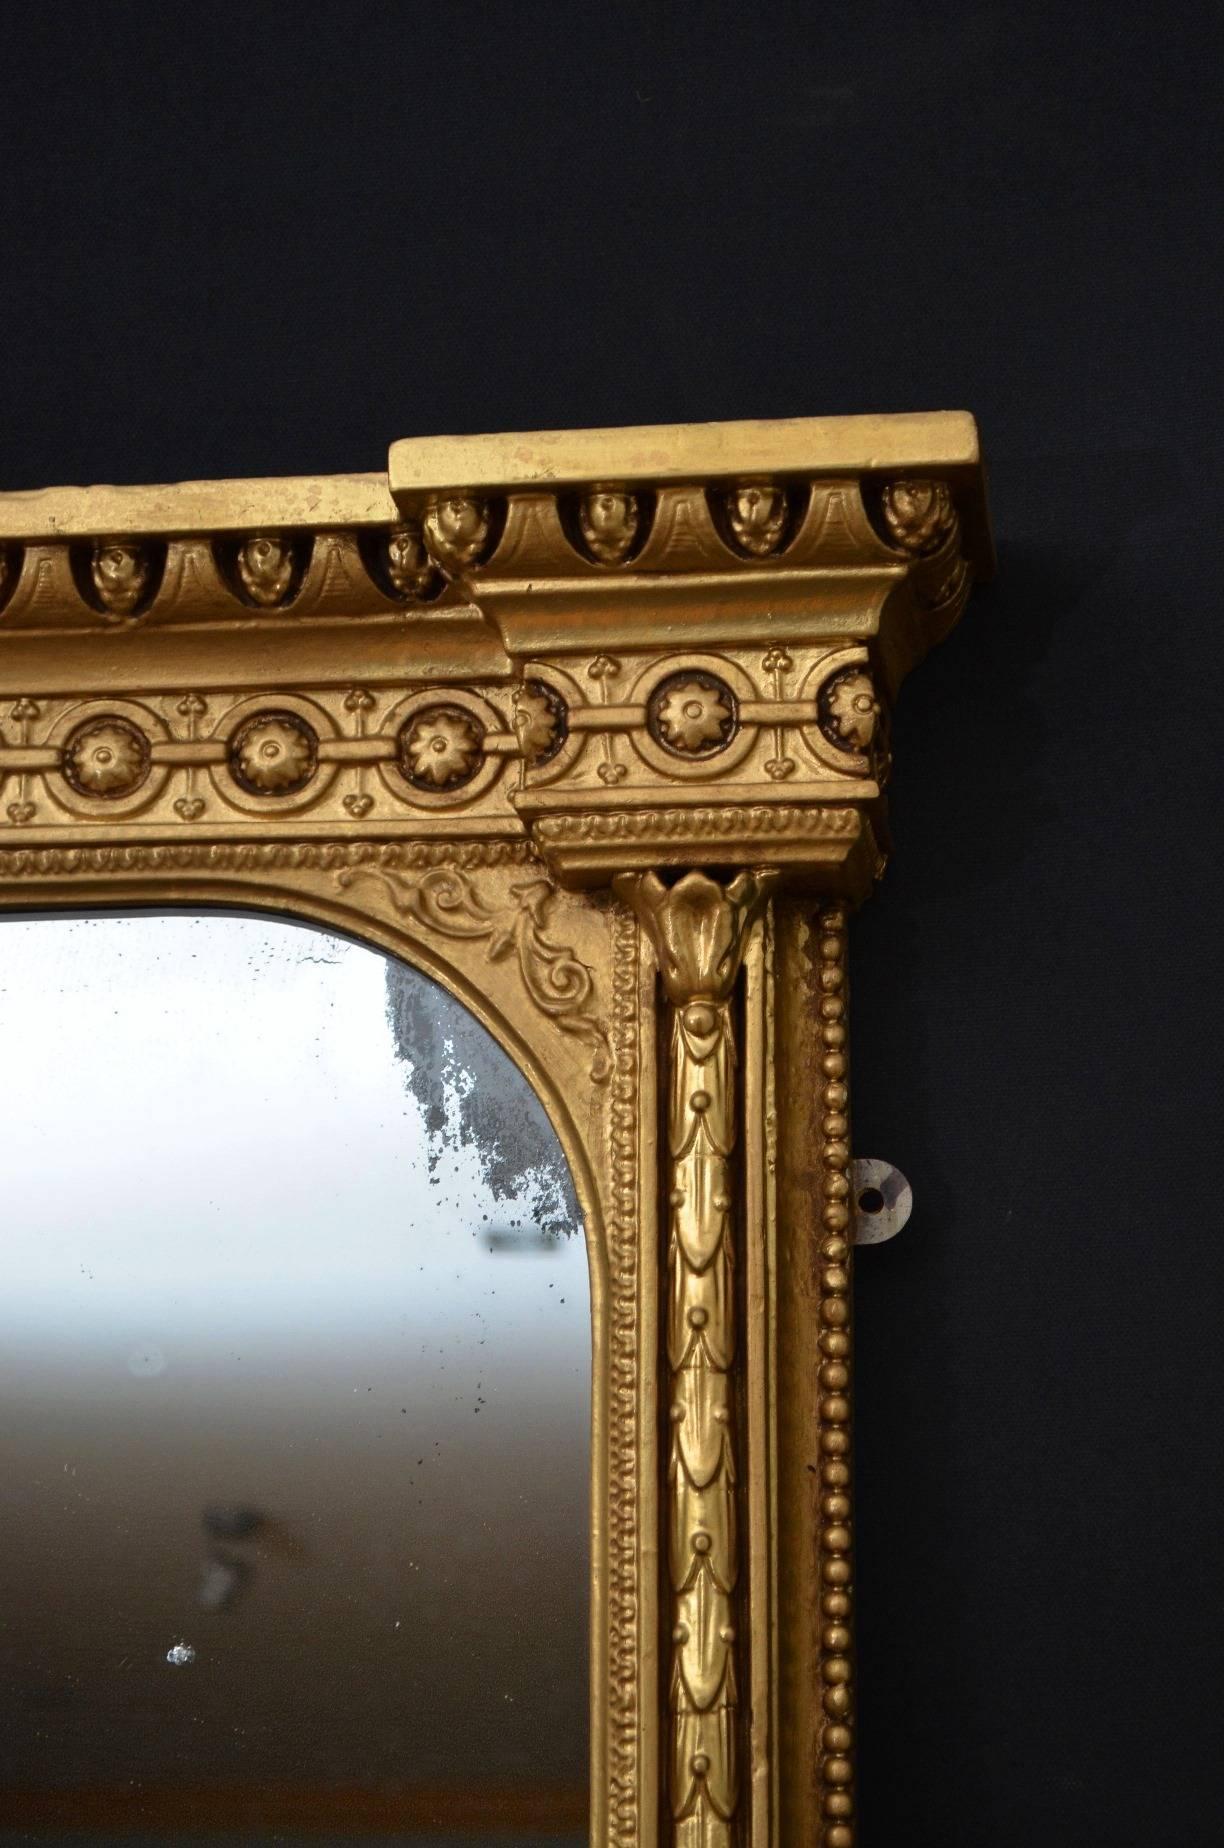 K0219, very impressive English gilt wall mirror of large proportions, having original mirror plate with foxing and age related marks in beautifully decorated giltwood frame. The frame has been refinished in the past and it is wonderful condition